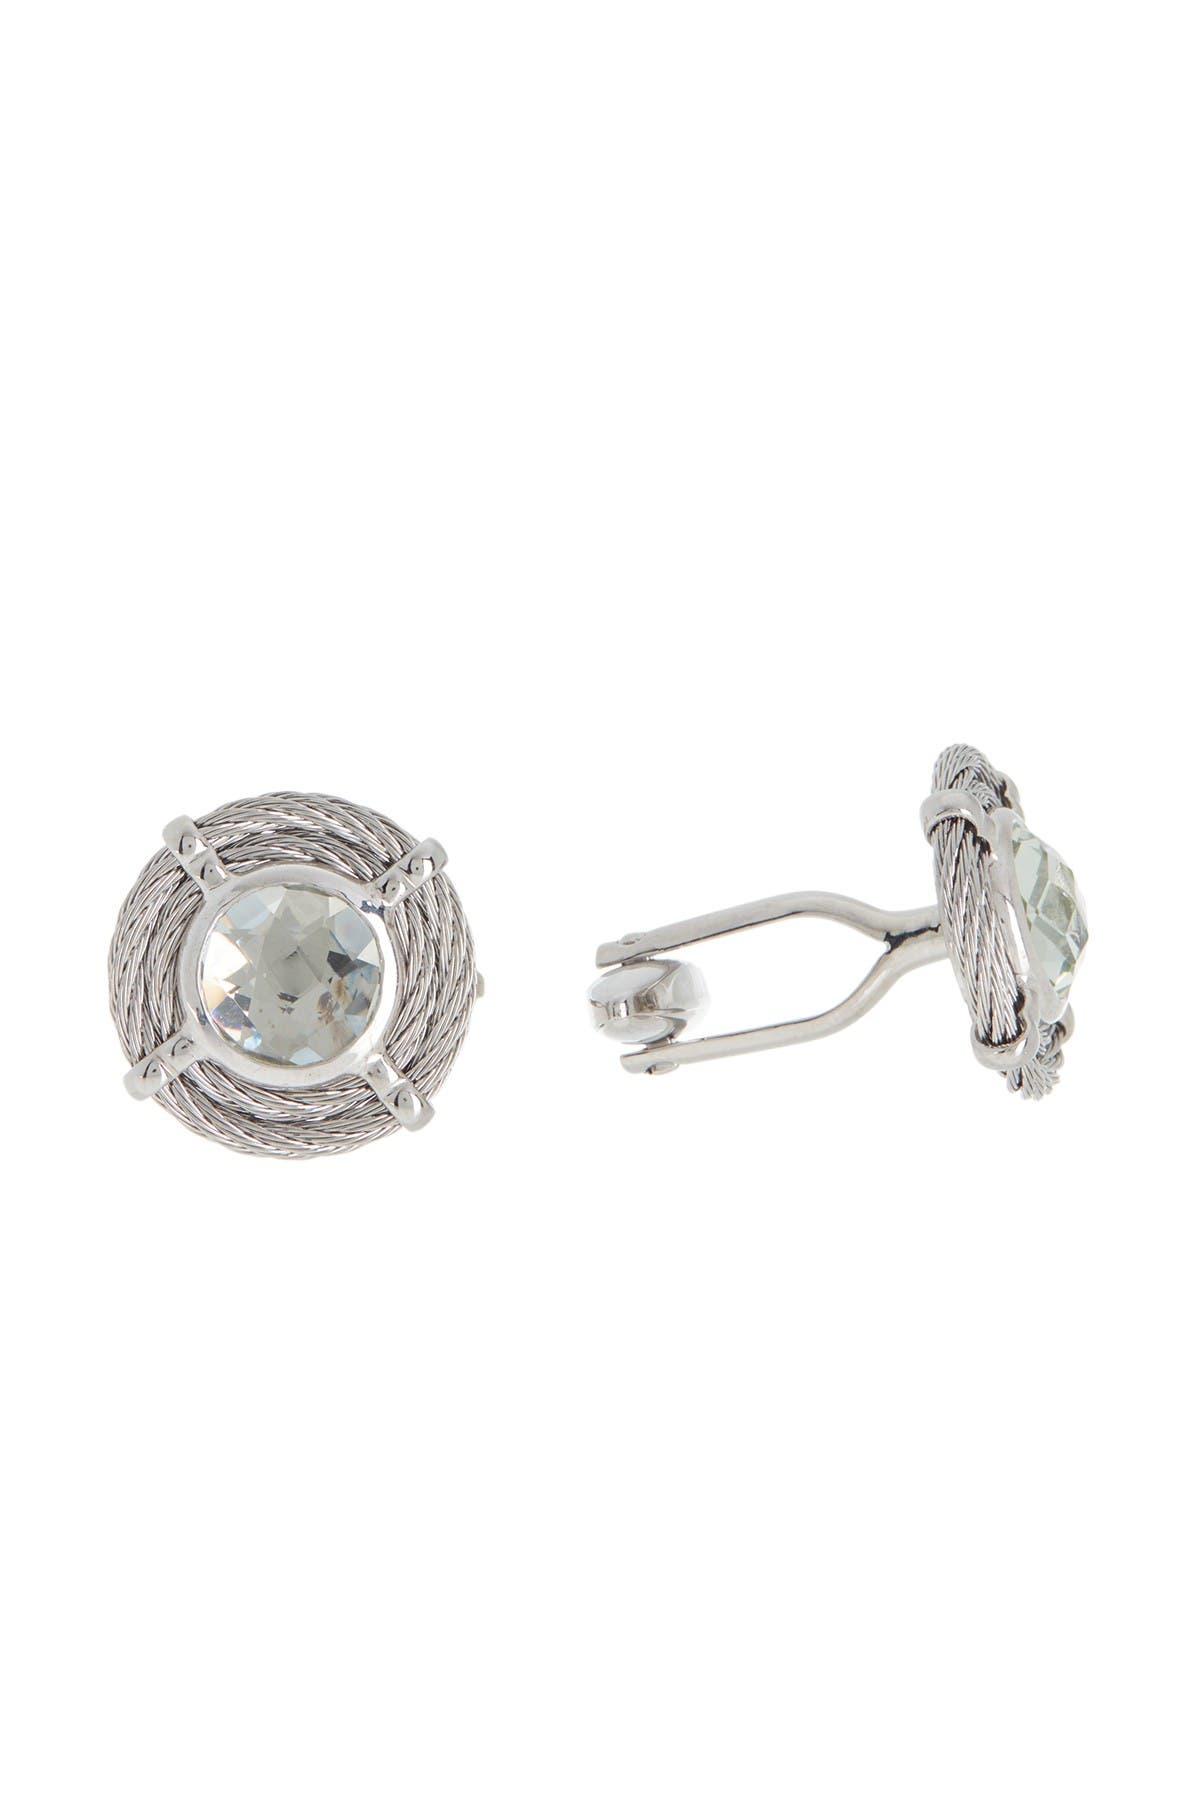 Alor Grey Stainless Steel Cable Green Amethyst Cuff Links